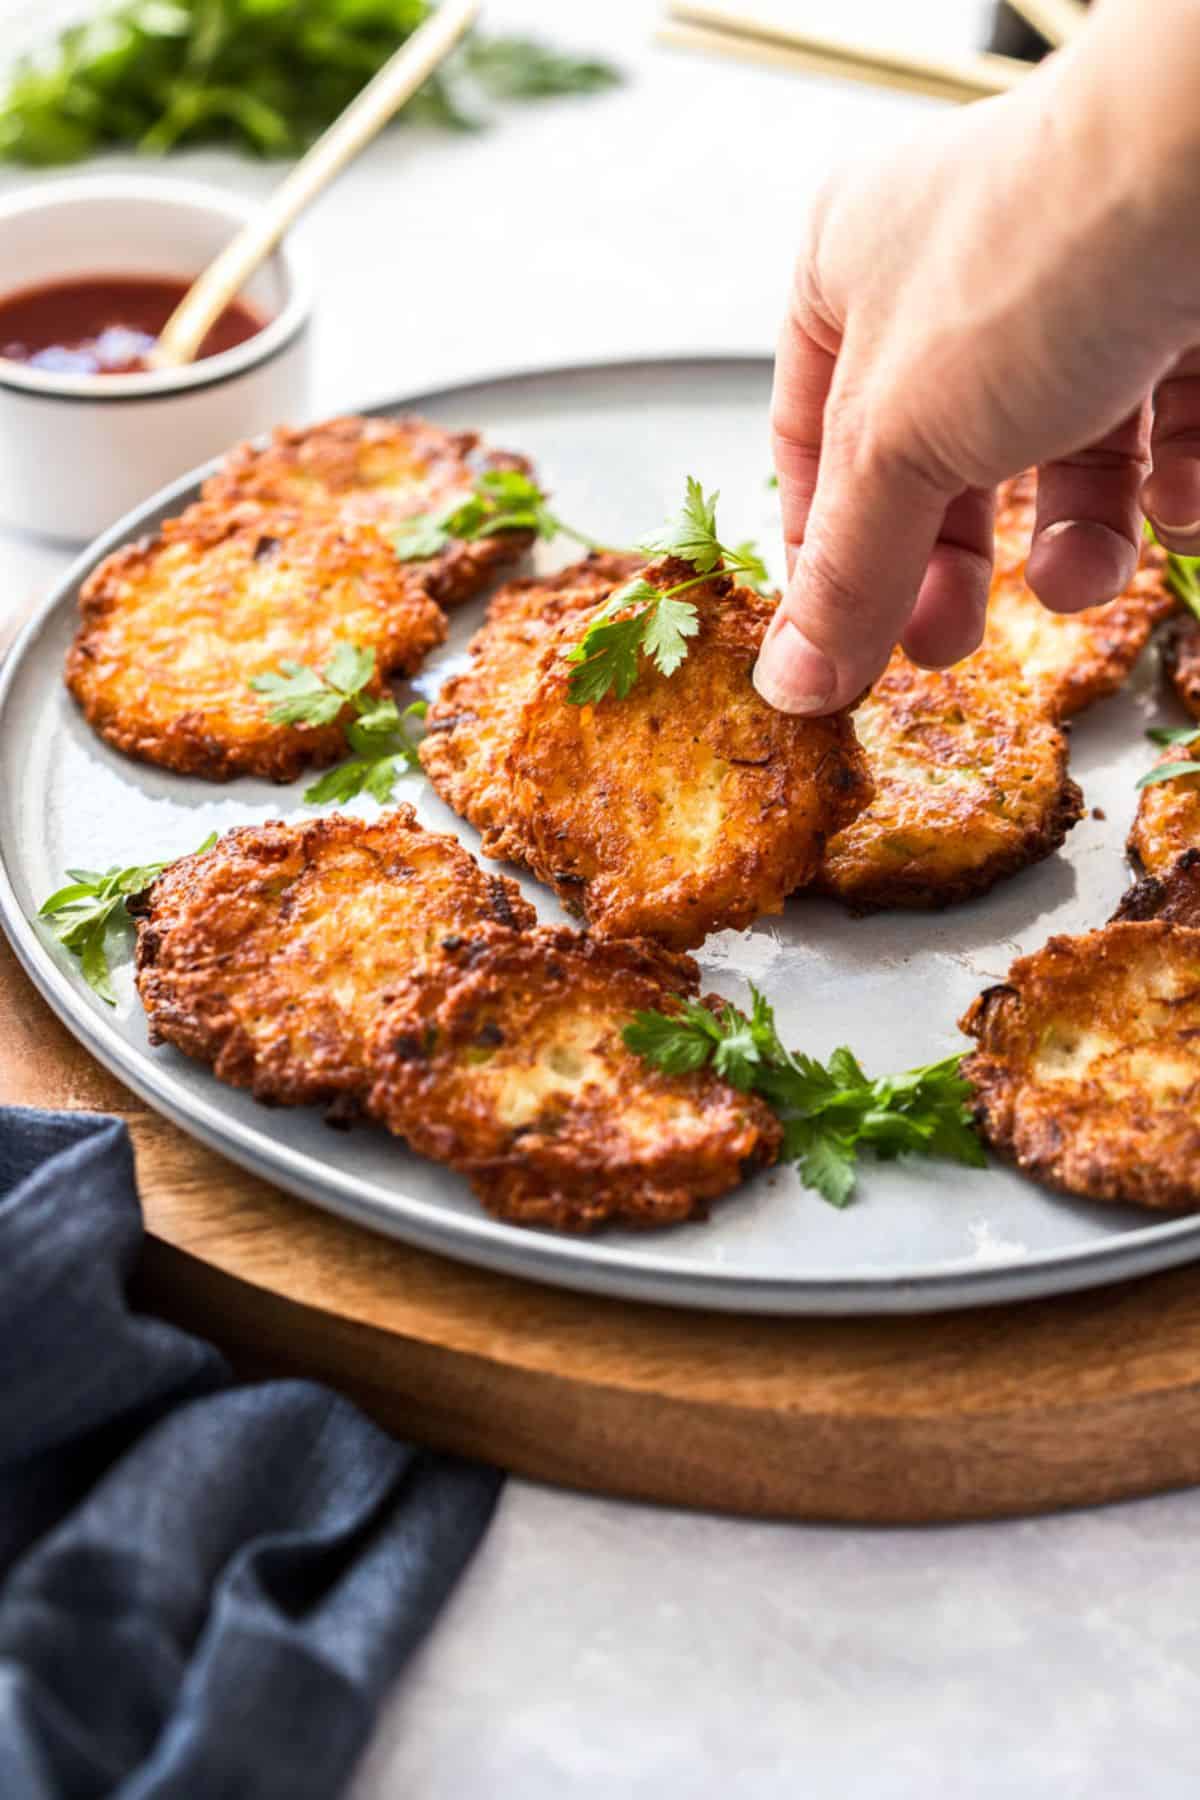 Hand reaching to pick up an onion fritter off a round grey plate.